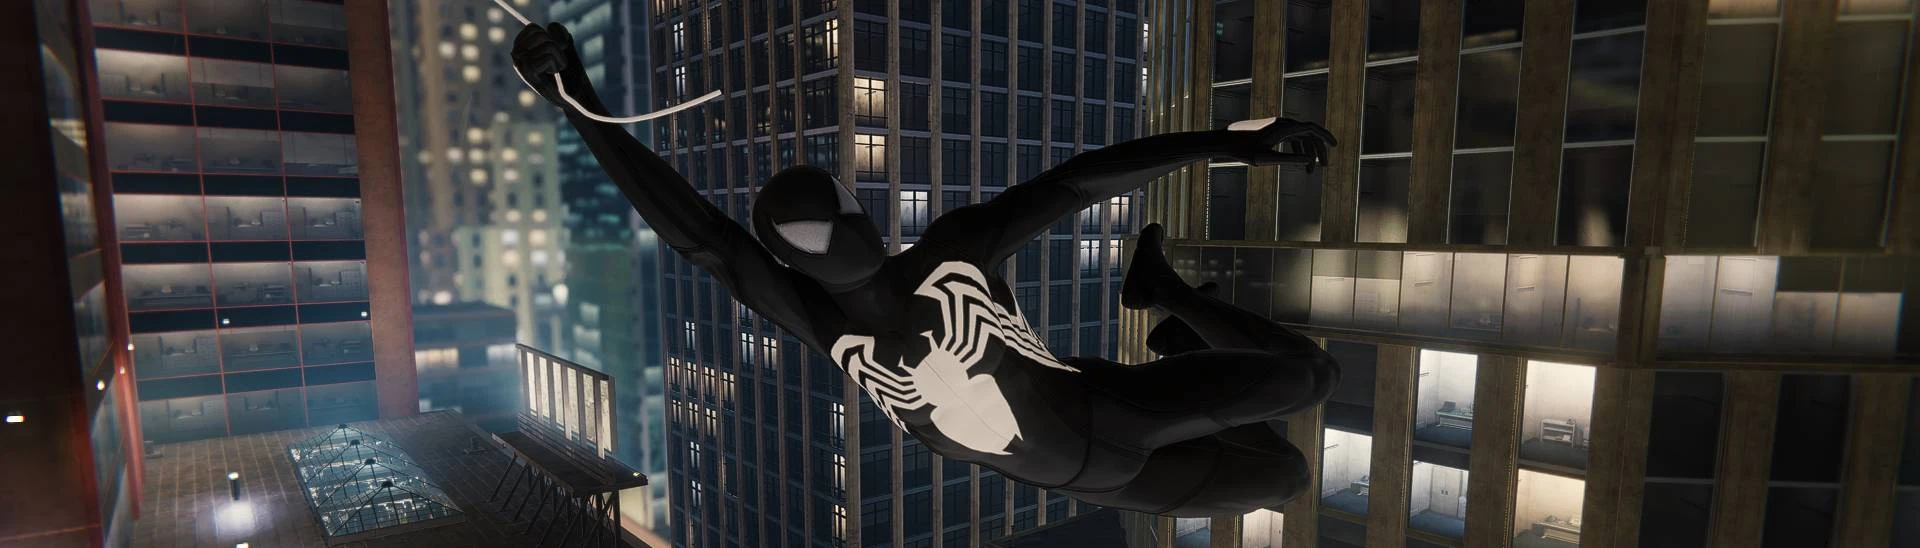 SpiderMan 2 PS5 Peter's Symbiote Suit Transformation Showcase SpiderMan PC  Mod at Marvel's Spider-Man Remastered Nexus - Mods and community